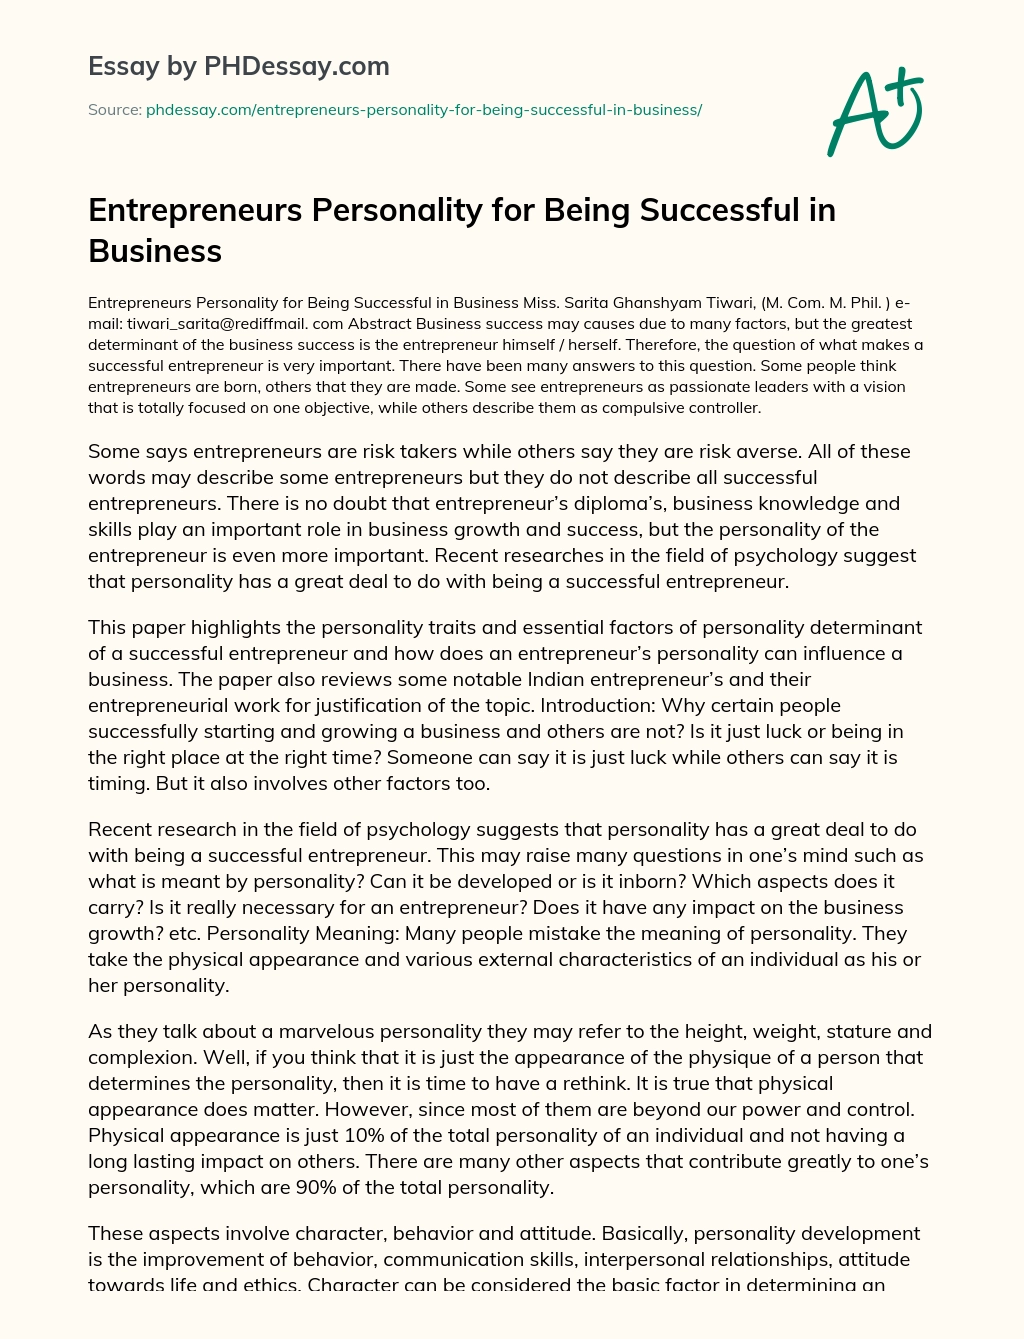 Entrepreneurs Personality for Being Successful in Business